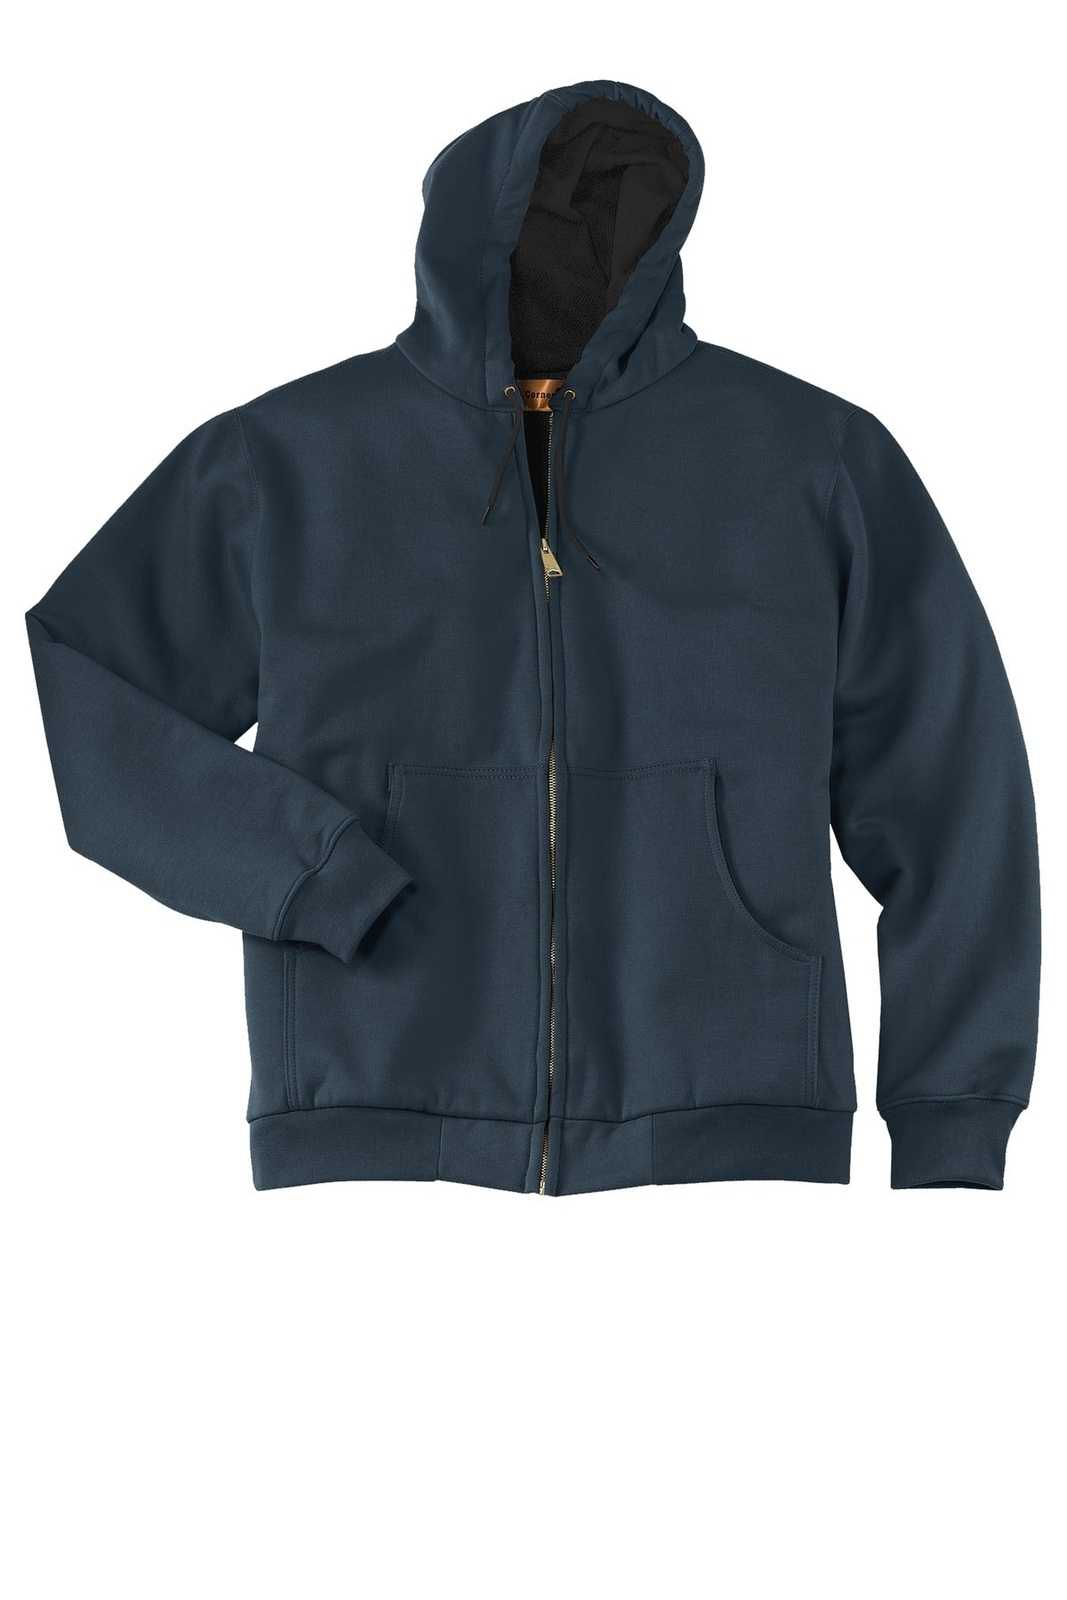 CornerStone CS620 Heavyweight Full-Zip Hooded Sweatshirt with Thermal Lining - Navy - HIT a Double - 5